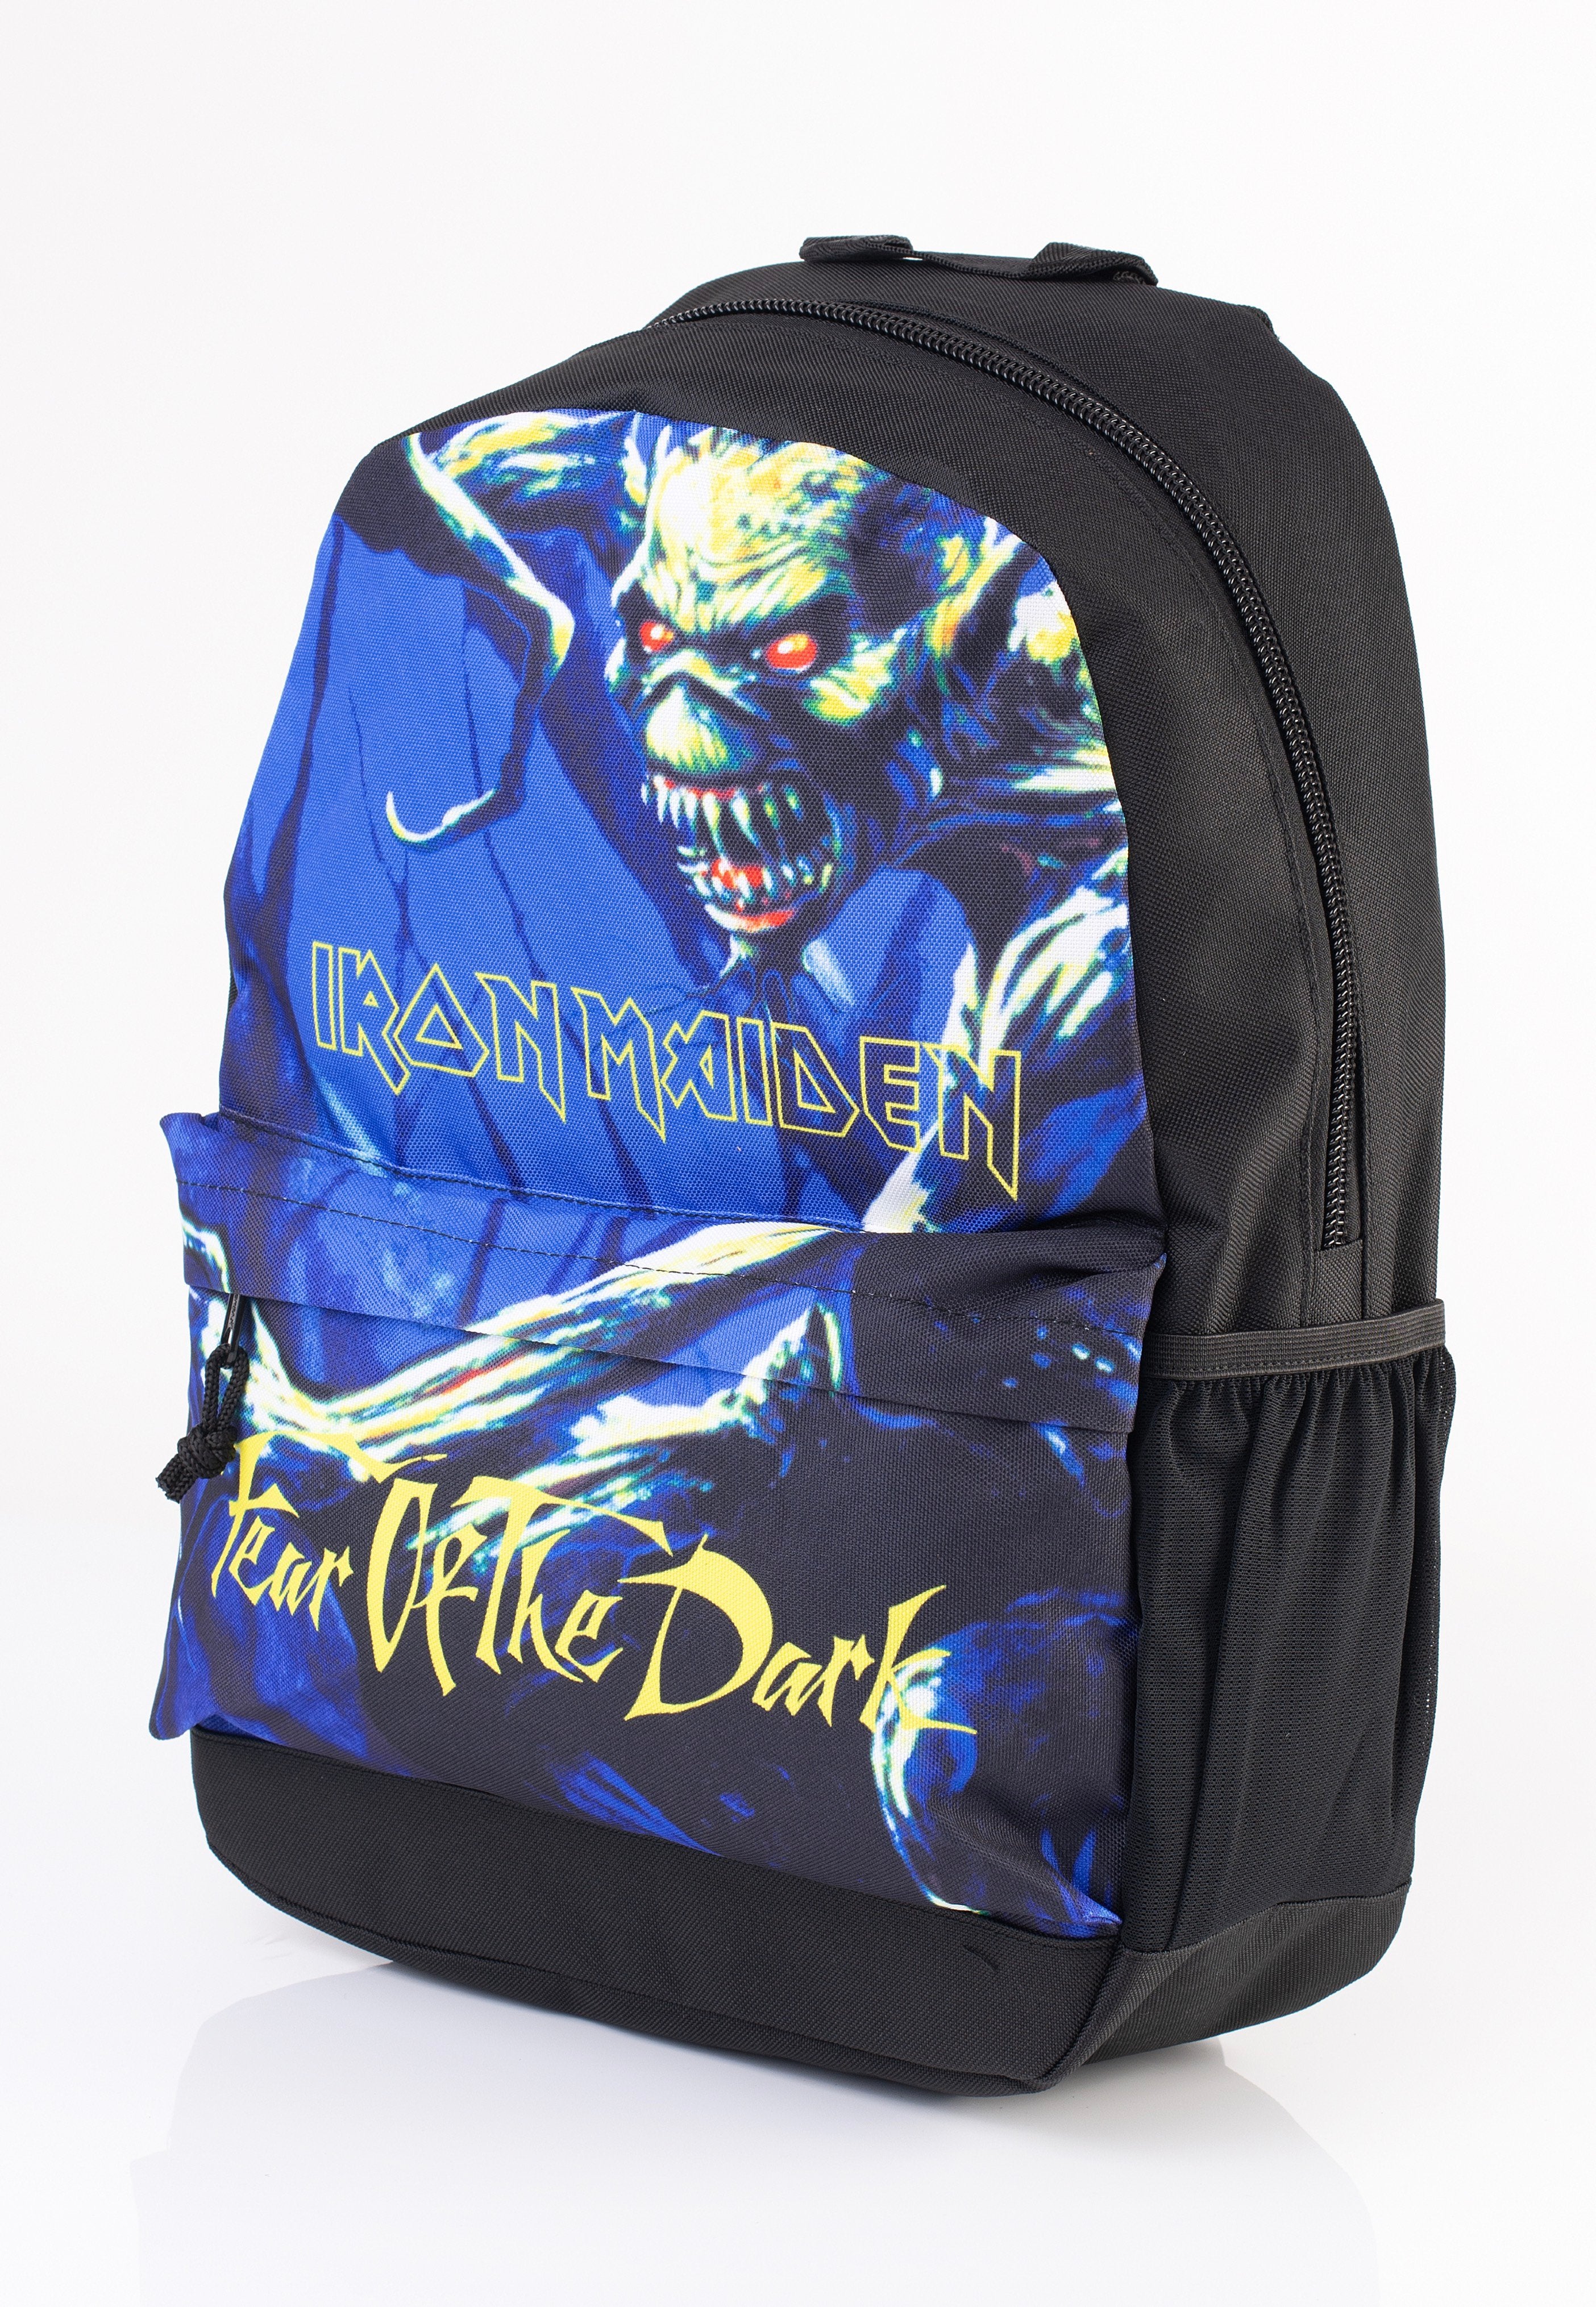 Iron Maiden - Fear Pocket - Backpack